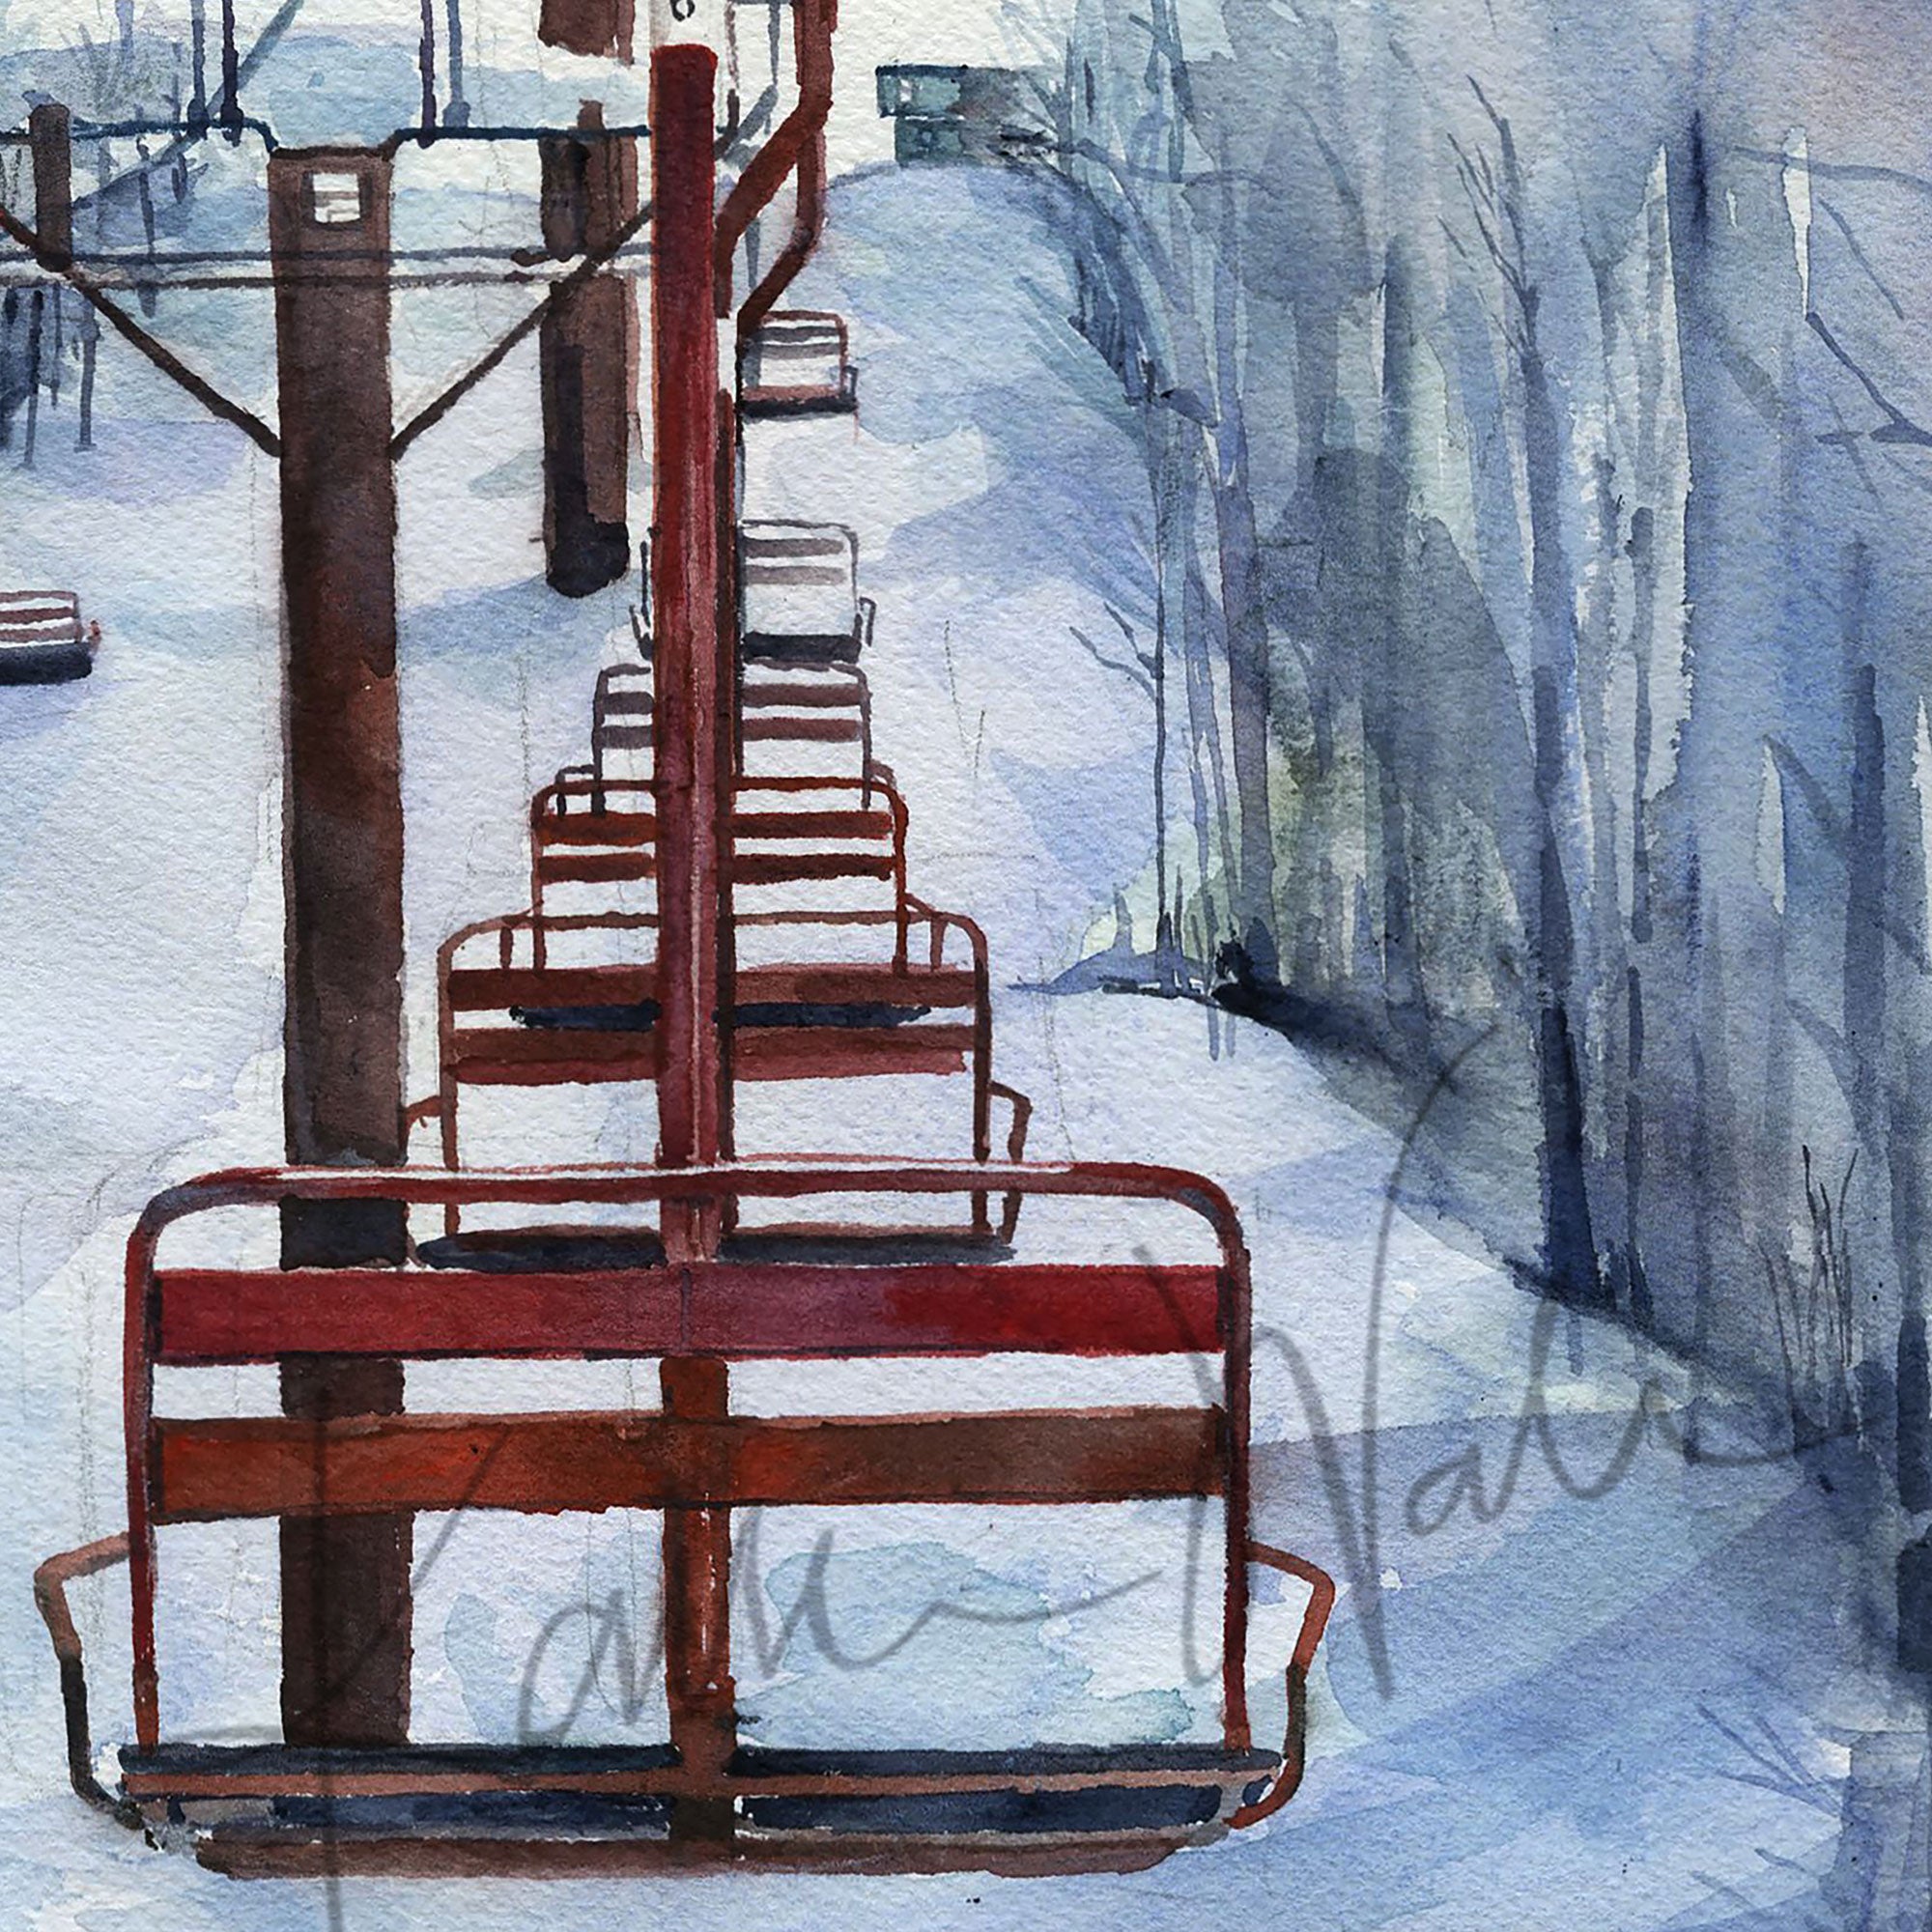 Zoomed in view of a watercolor painting of chairlifts in a snowy scene.